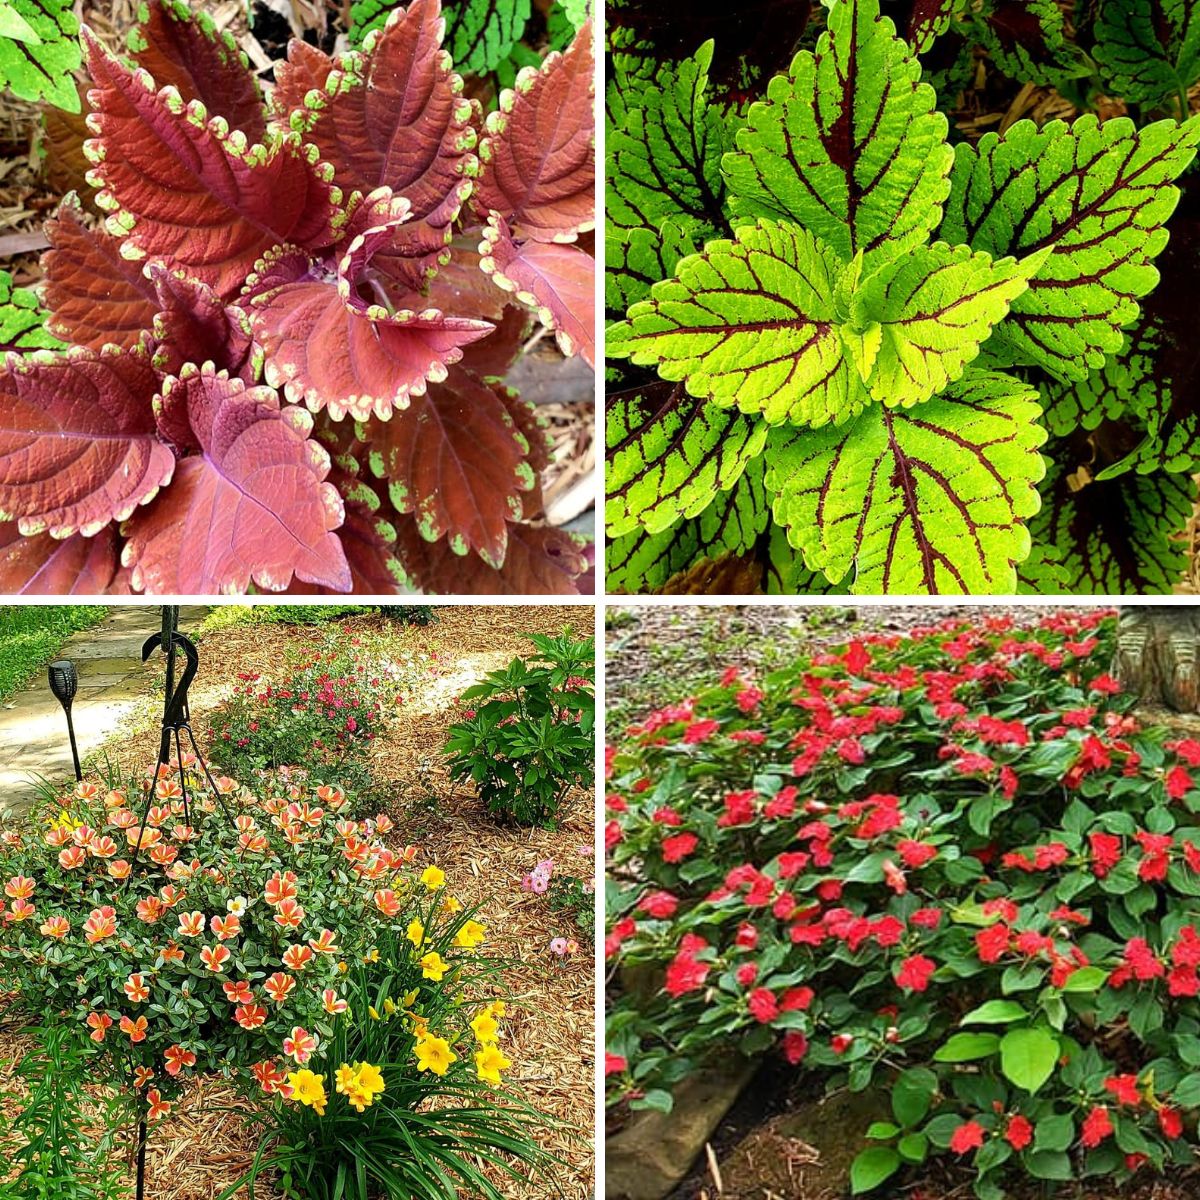 annuals I add for color: coleus, impatiens and daylilies